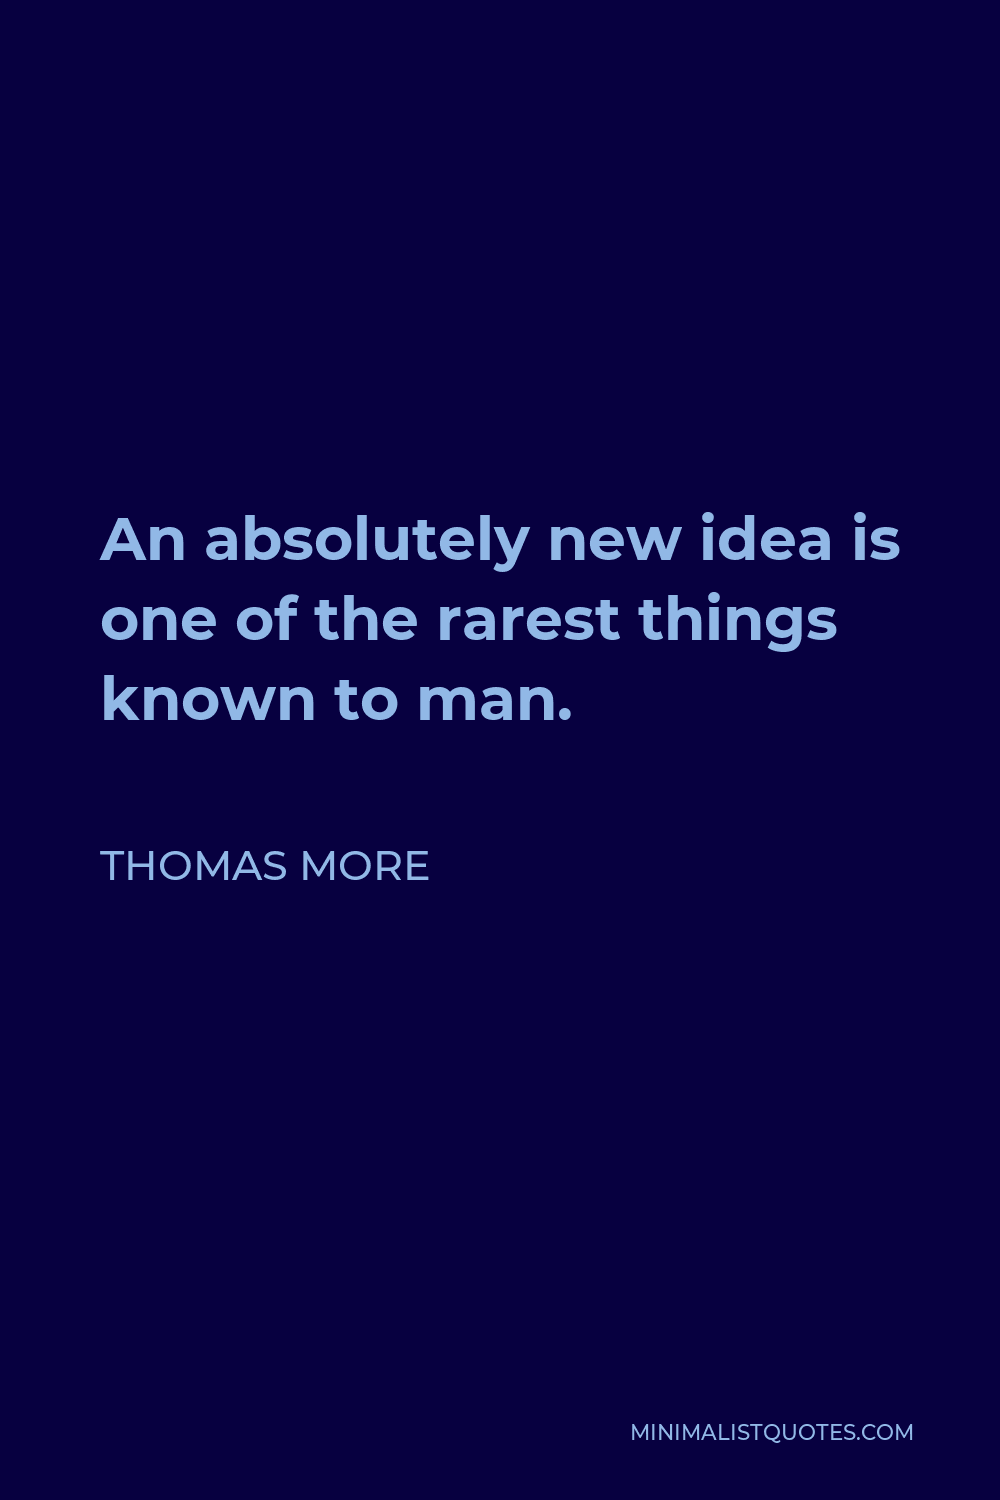 Thomas More Quote - An absolutely new idea is one of the rarest things known to man.